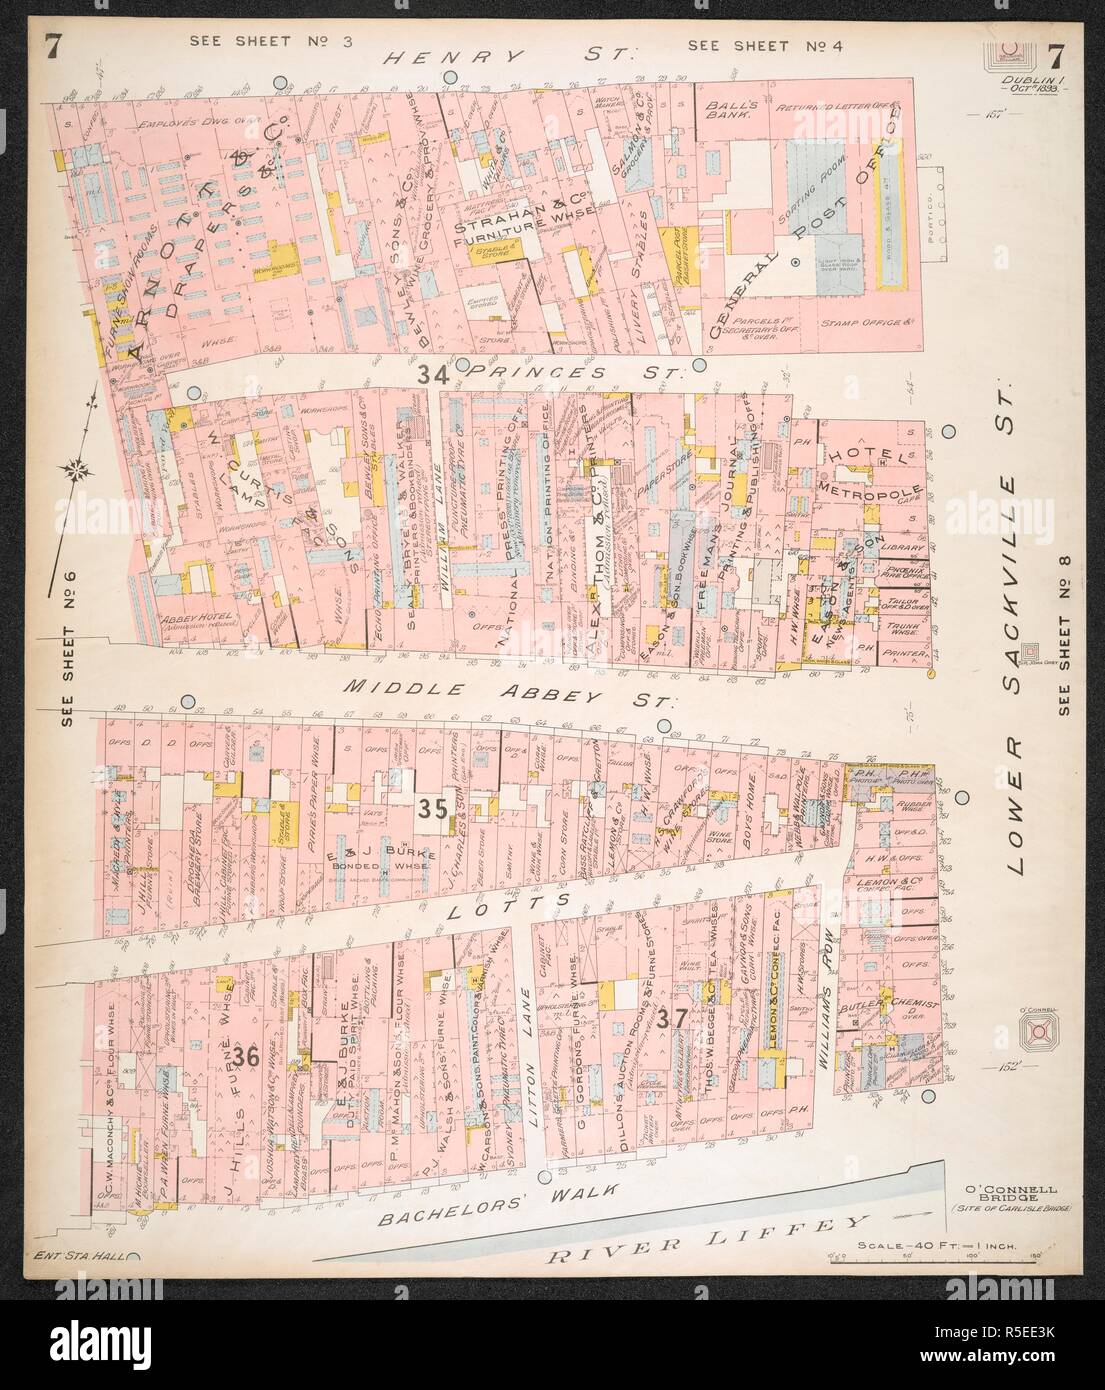 Section of an insurance Plan of the City of Dublin, showing Henry street; Princes street; Middle Abbey street; Lotts; Bachelor's walk, and the River Liffey. Insurance Plan of the City of Dublin ... [By] C.E. Goad ... Scale, 40 ft. = 1 inch ... Key-Plan, 600 ft. = 1 inch. Vol. 1. London : C.E. Goad, 1893. fol.; Scale, 40 ft. = 1 inch ... Key-Plan, 600 ft. = 1 inch. Source: Maps.145.b.4.(2) sheet 7. Stock Photo